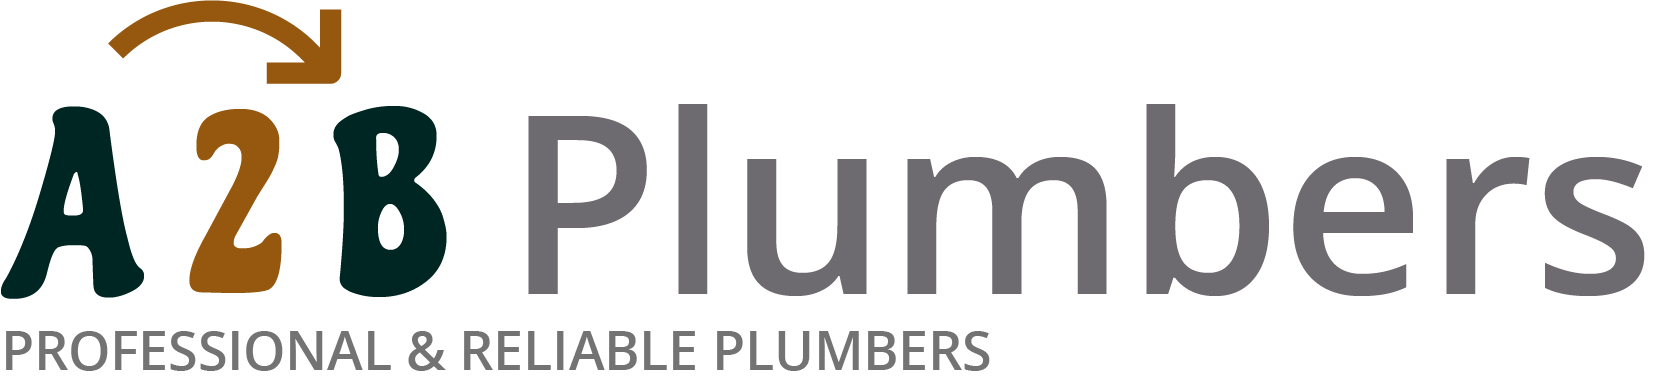 If you need a boiler installed, a radiator repaired or a leaking tap fixed, call us now - we provide services for properties in Pudsey and the local area.